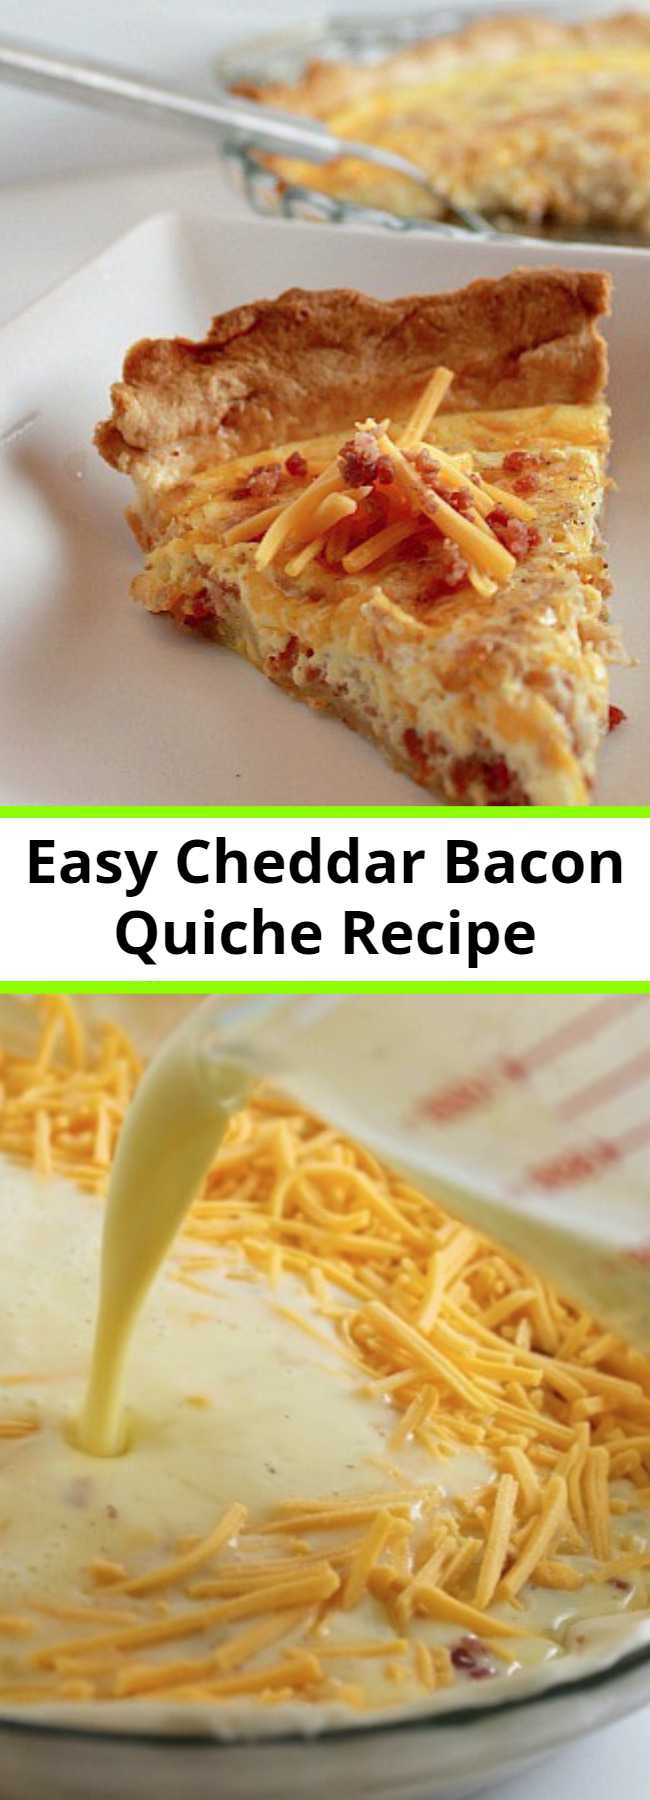 Easy Cheddar Bacon Quiche Recipe - This Cheddar Bacon Quiche recipe comes together quickly. It's very flexible allowing you to use what ever ingredients you have on hand.